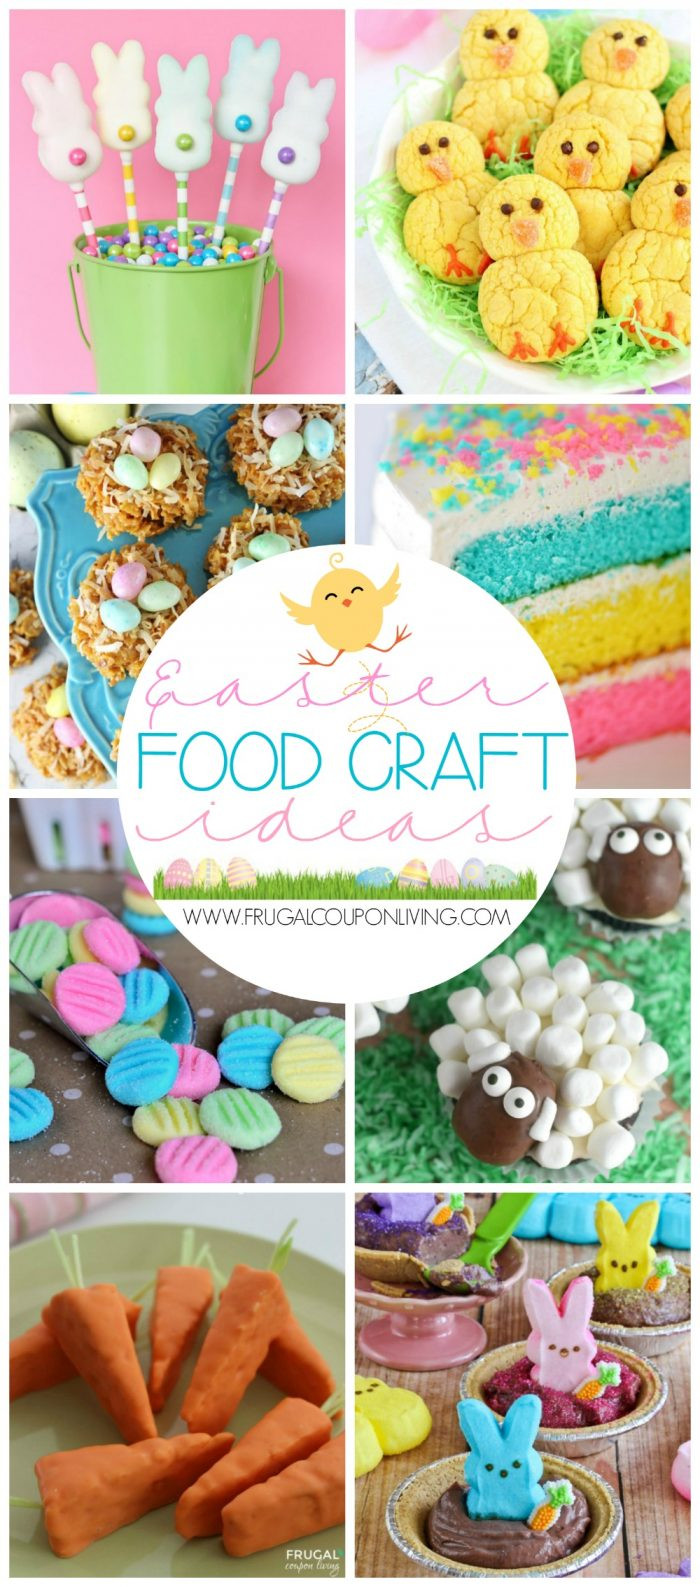 Easter Ideas
 Easter Food Craft Ideas for the Kids